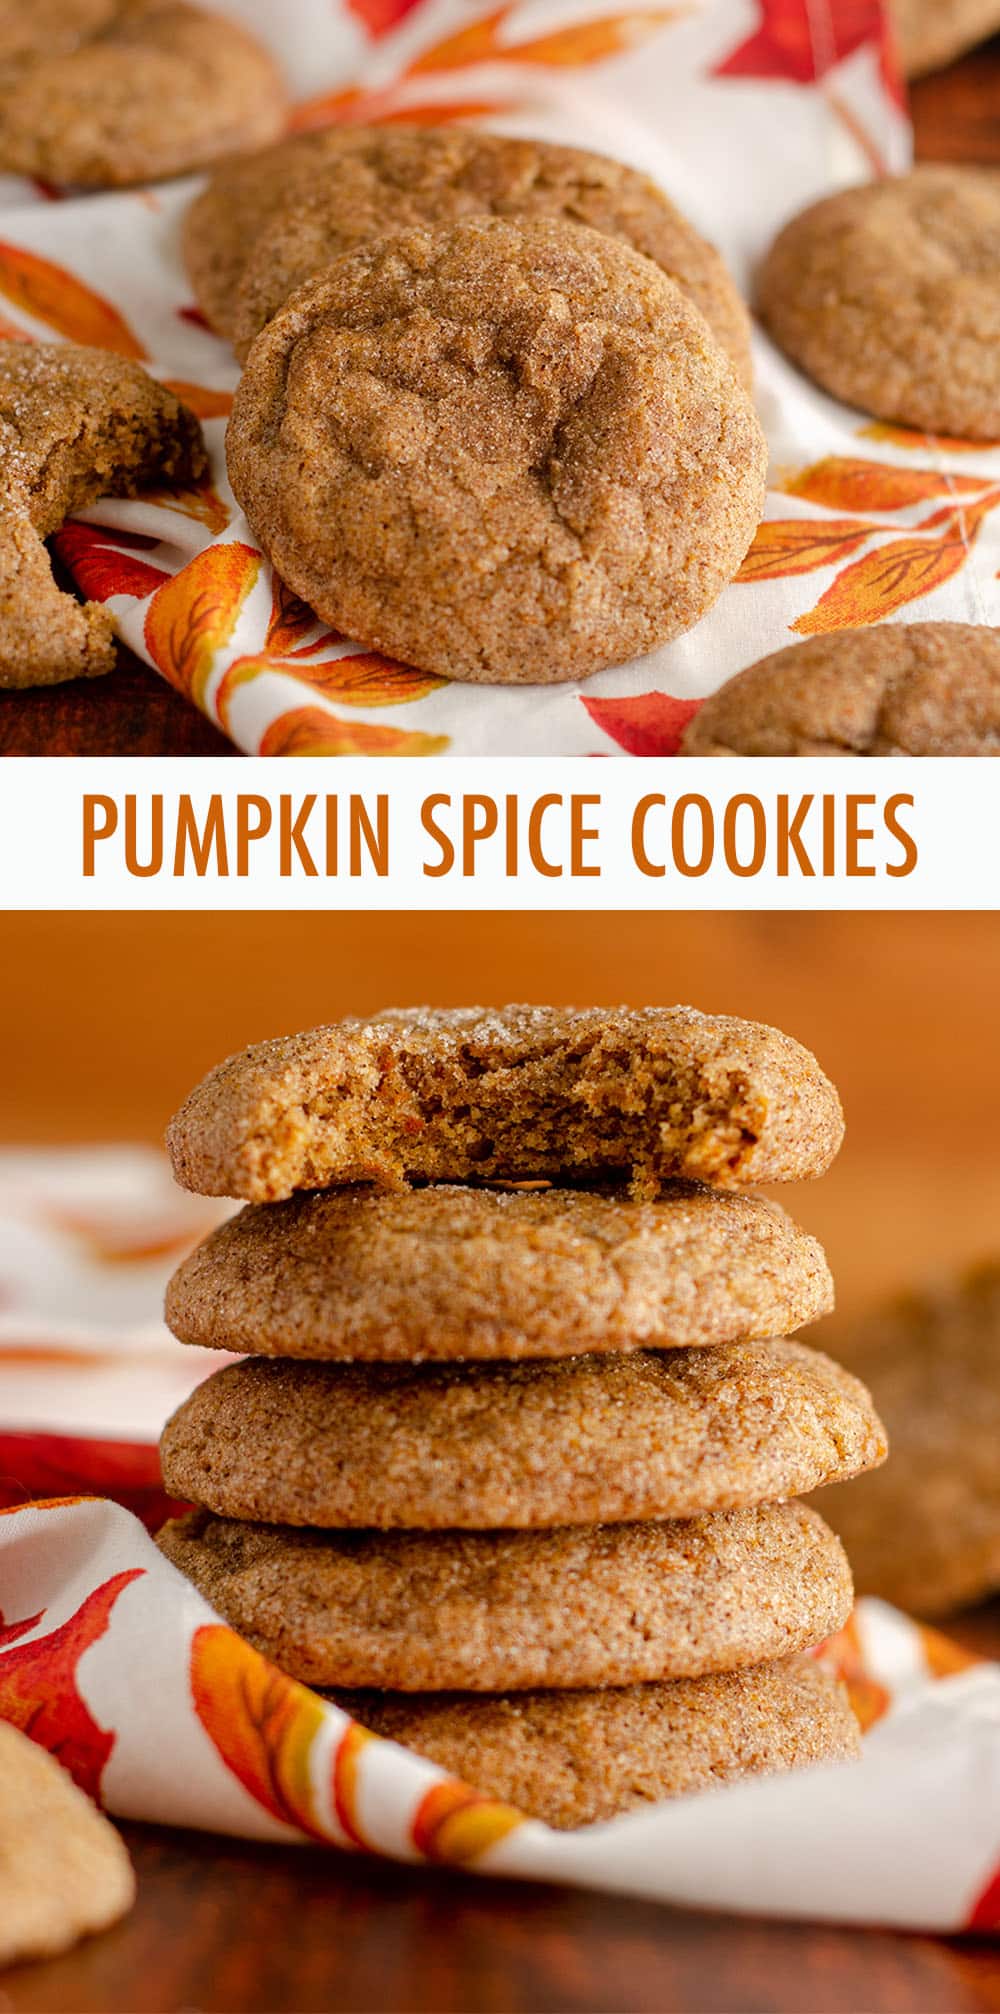 These eggless chewy pumpkin spice cookies are like a pumpkin snickerdoodle, coated in a spiced cinnamon sugar with a perfectly soft and chewy interior bursting with pumpkin flavor. via @frshaprilflours